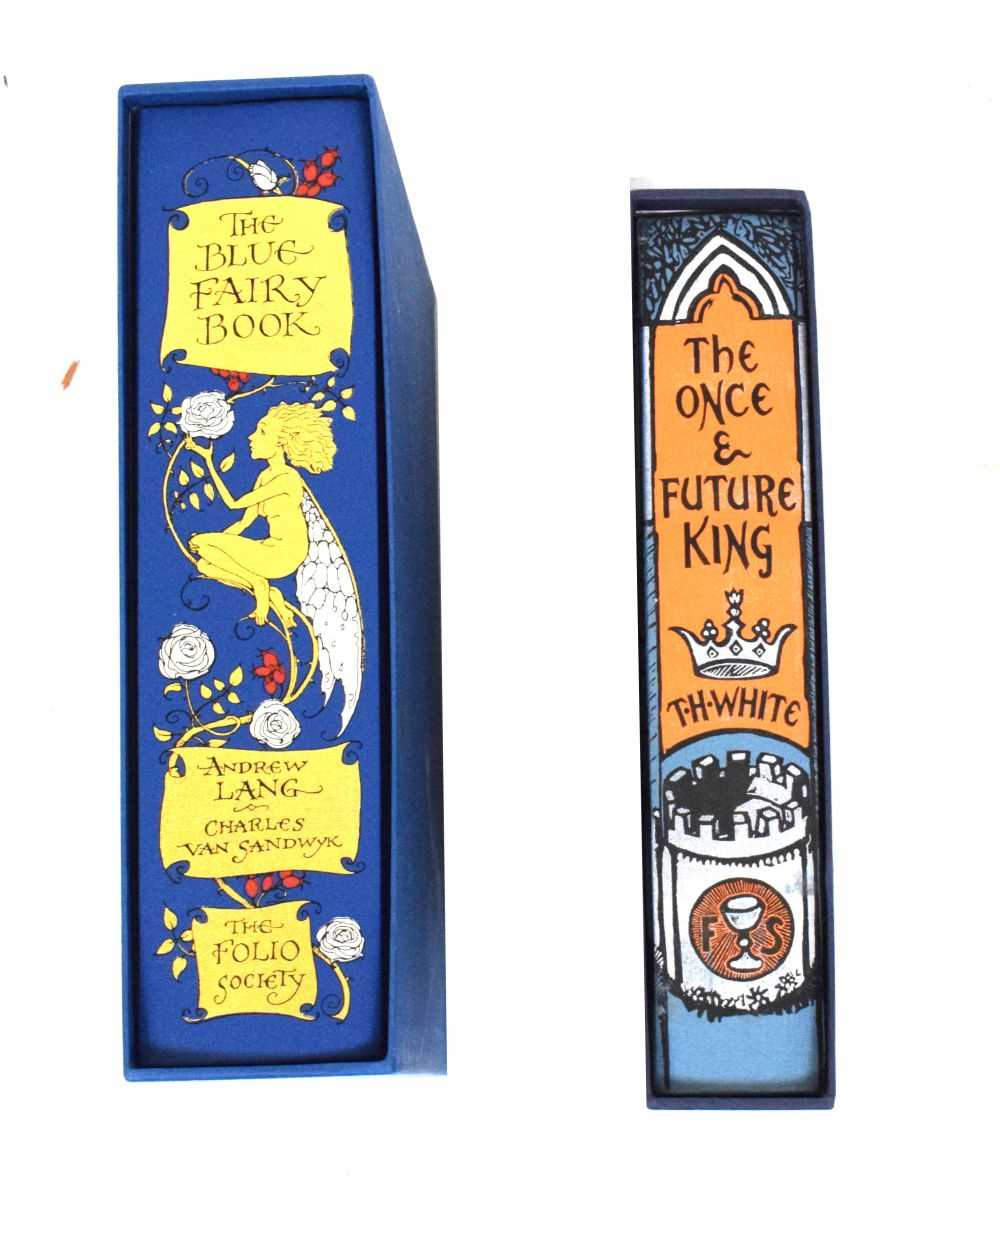 Books - Folio Society Blue Fairy book 2003, and 'Once and Future King' 2003